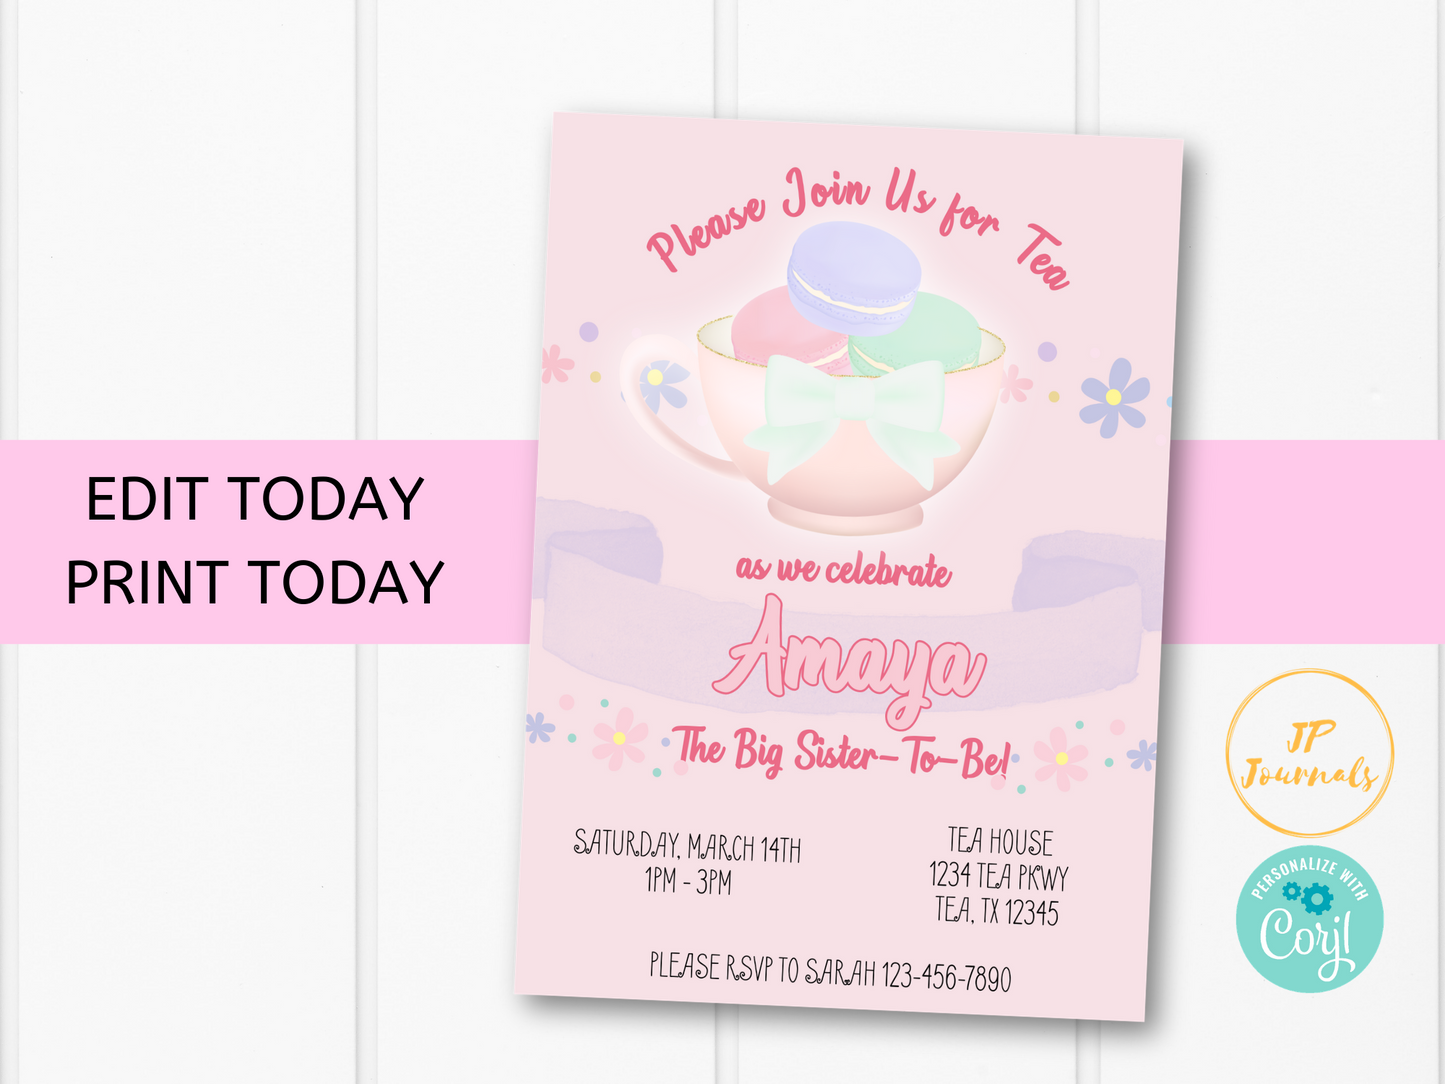 Big Sister Tea Party Invitation Template - Printable Invite - Edit and Print - Big Sister To Be Tea Party